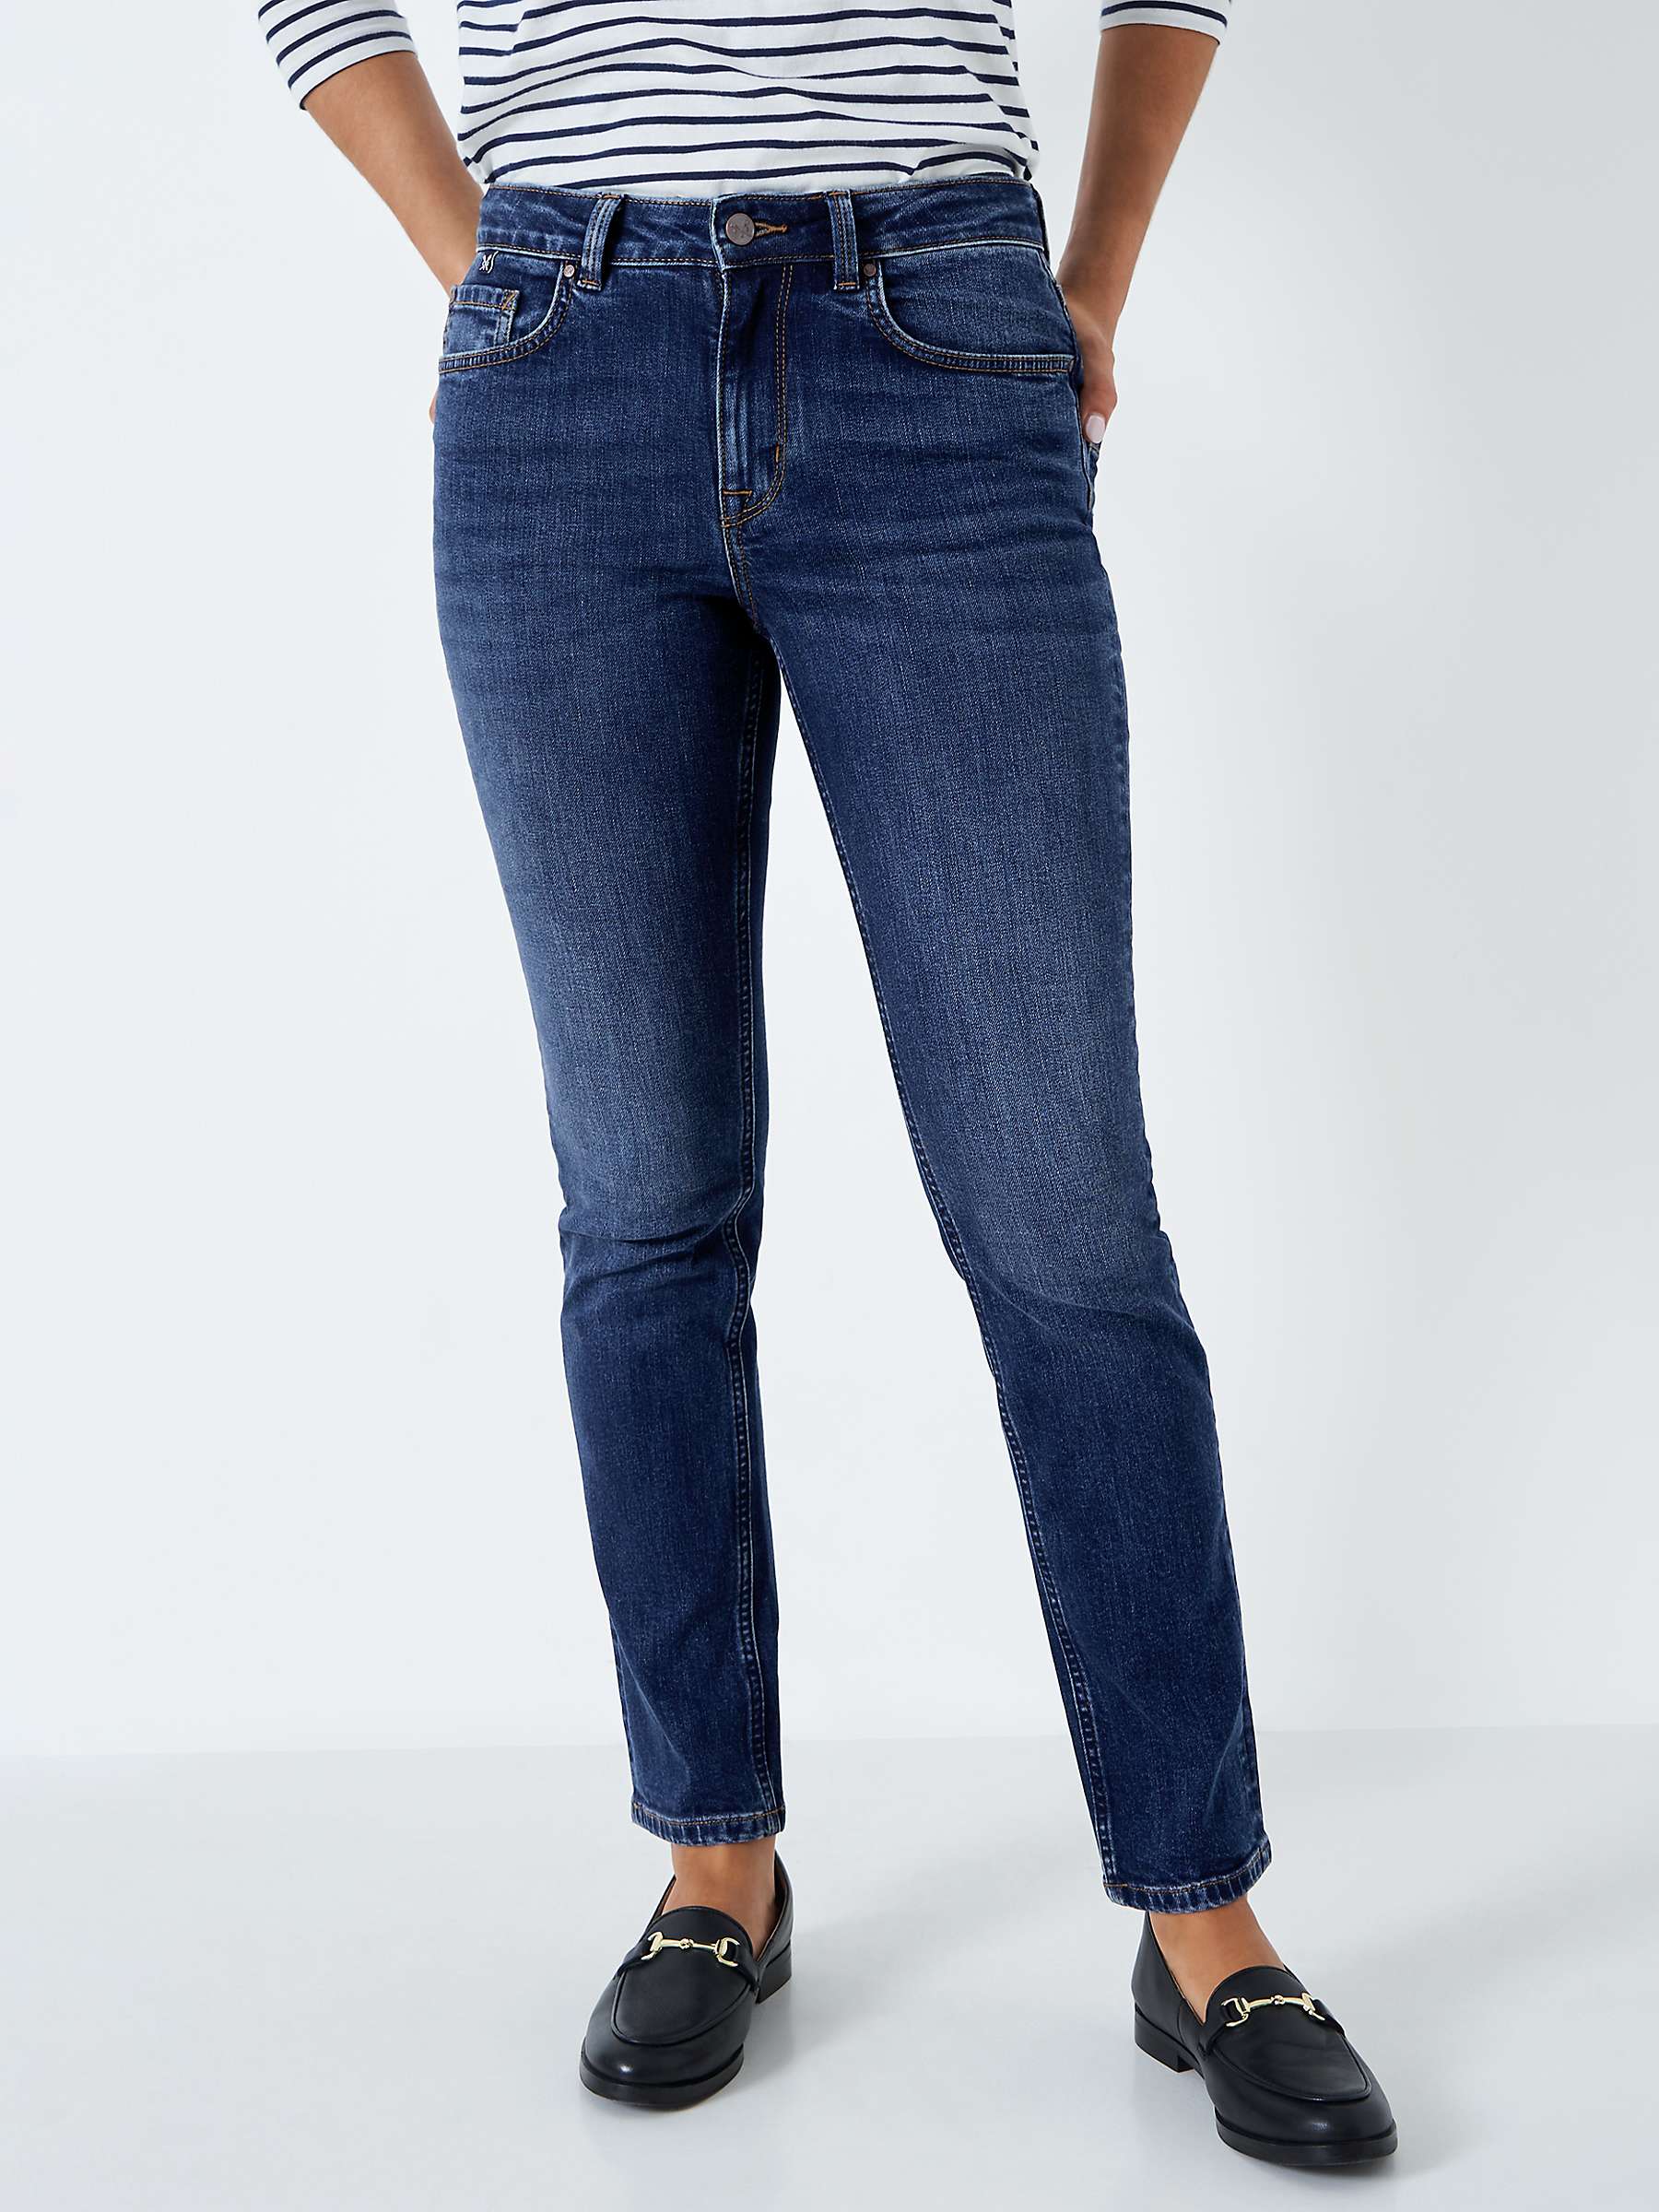 Buy Crew Clothing Straight Leg Jeans Online at johnlewis.com